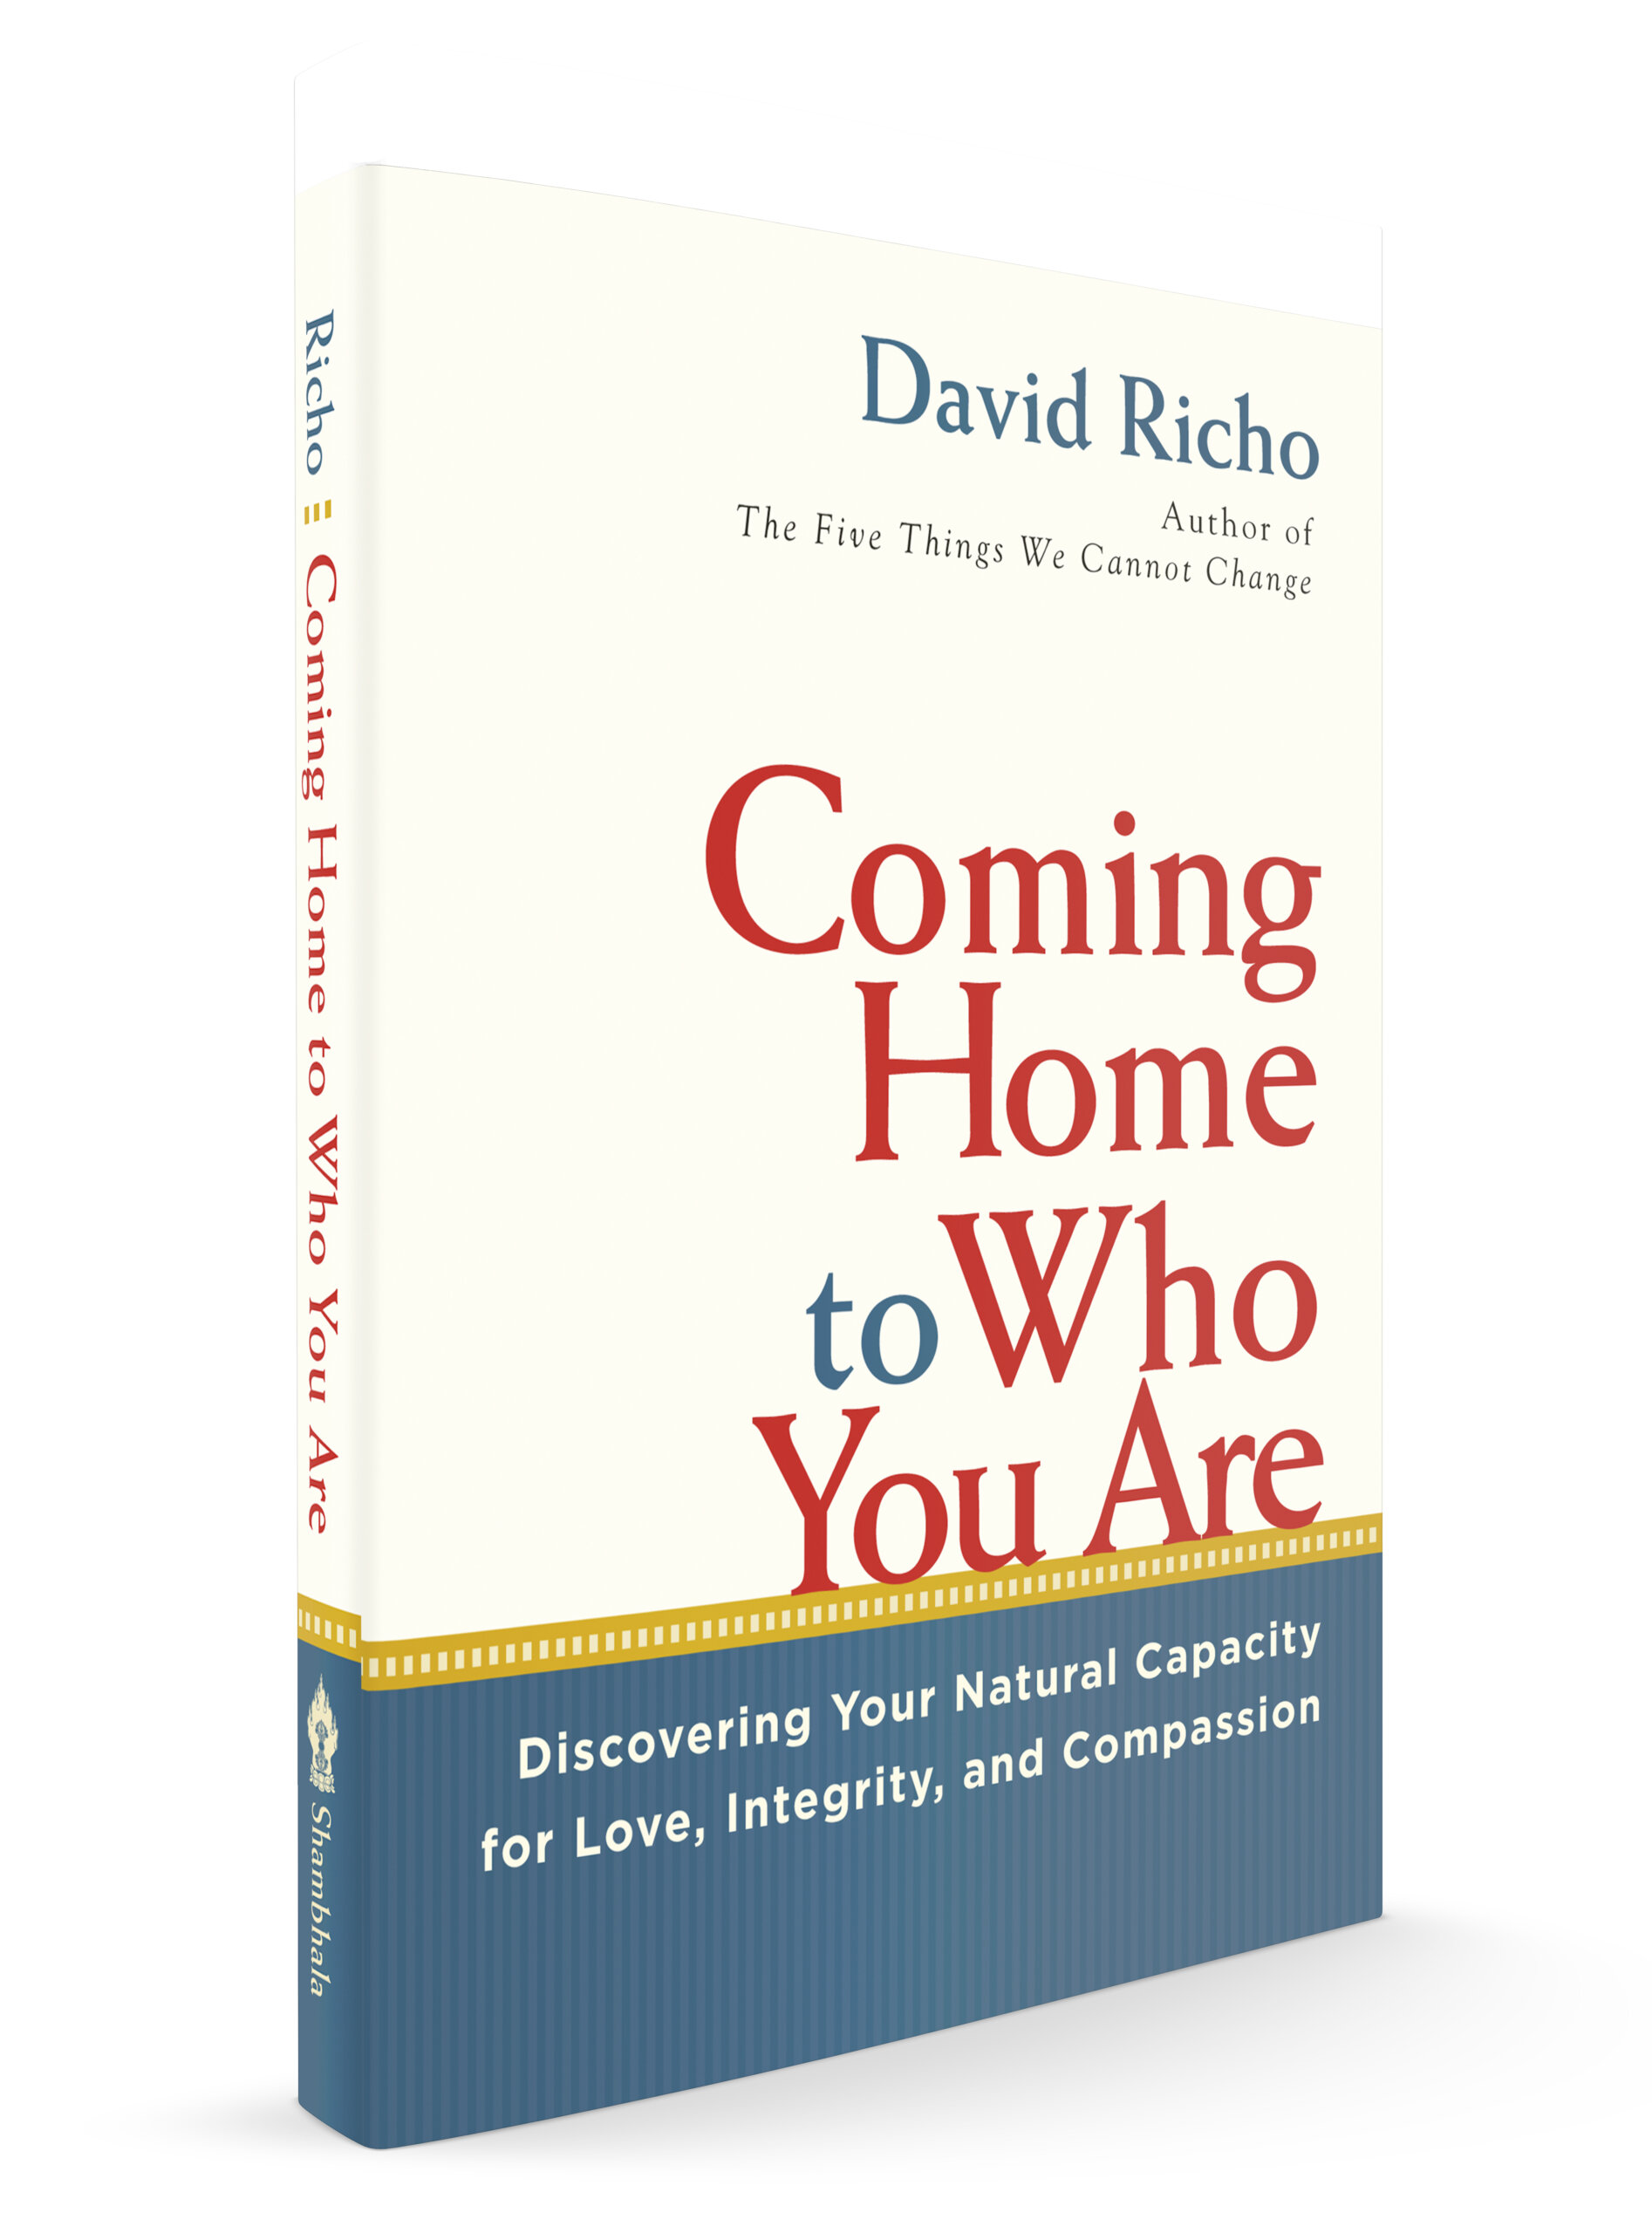 Coming Home to Who You Are